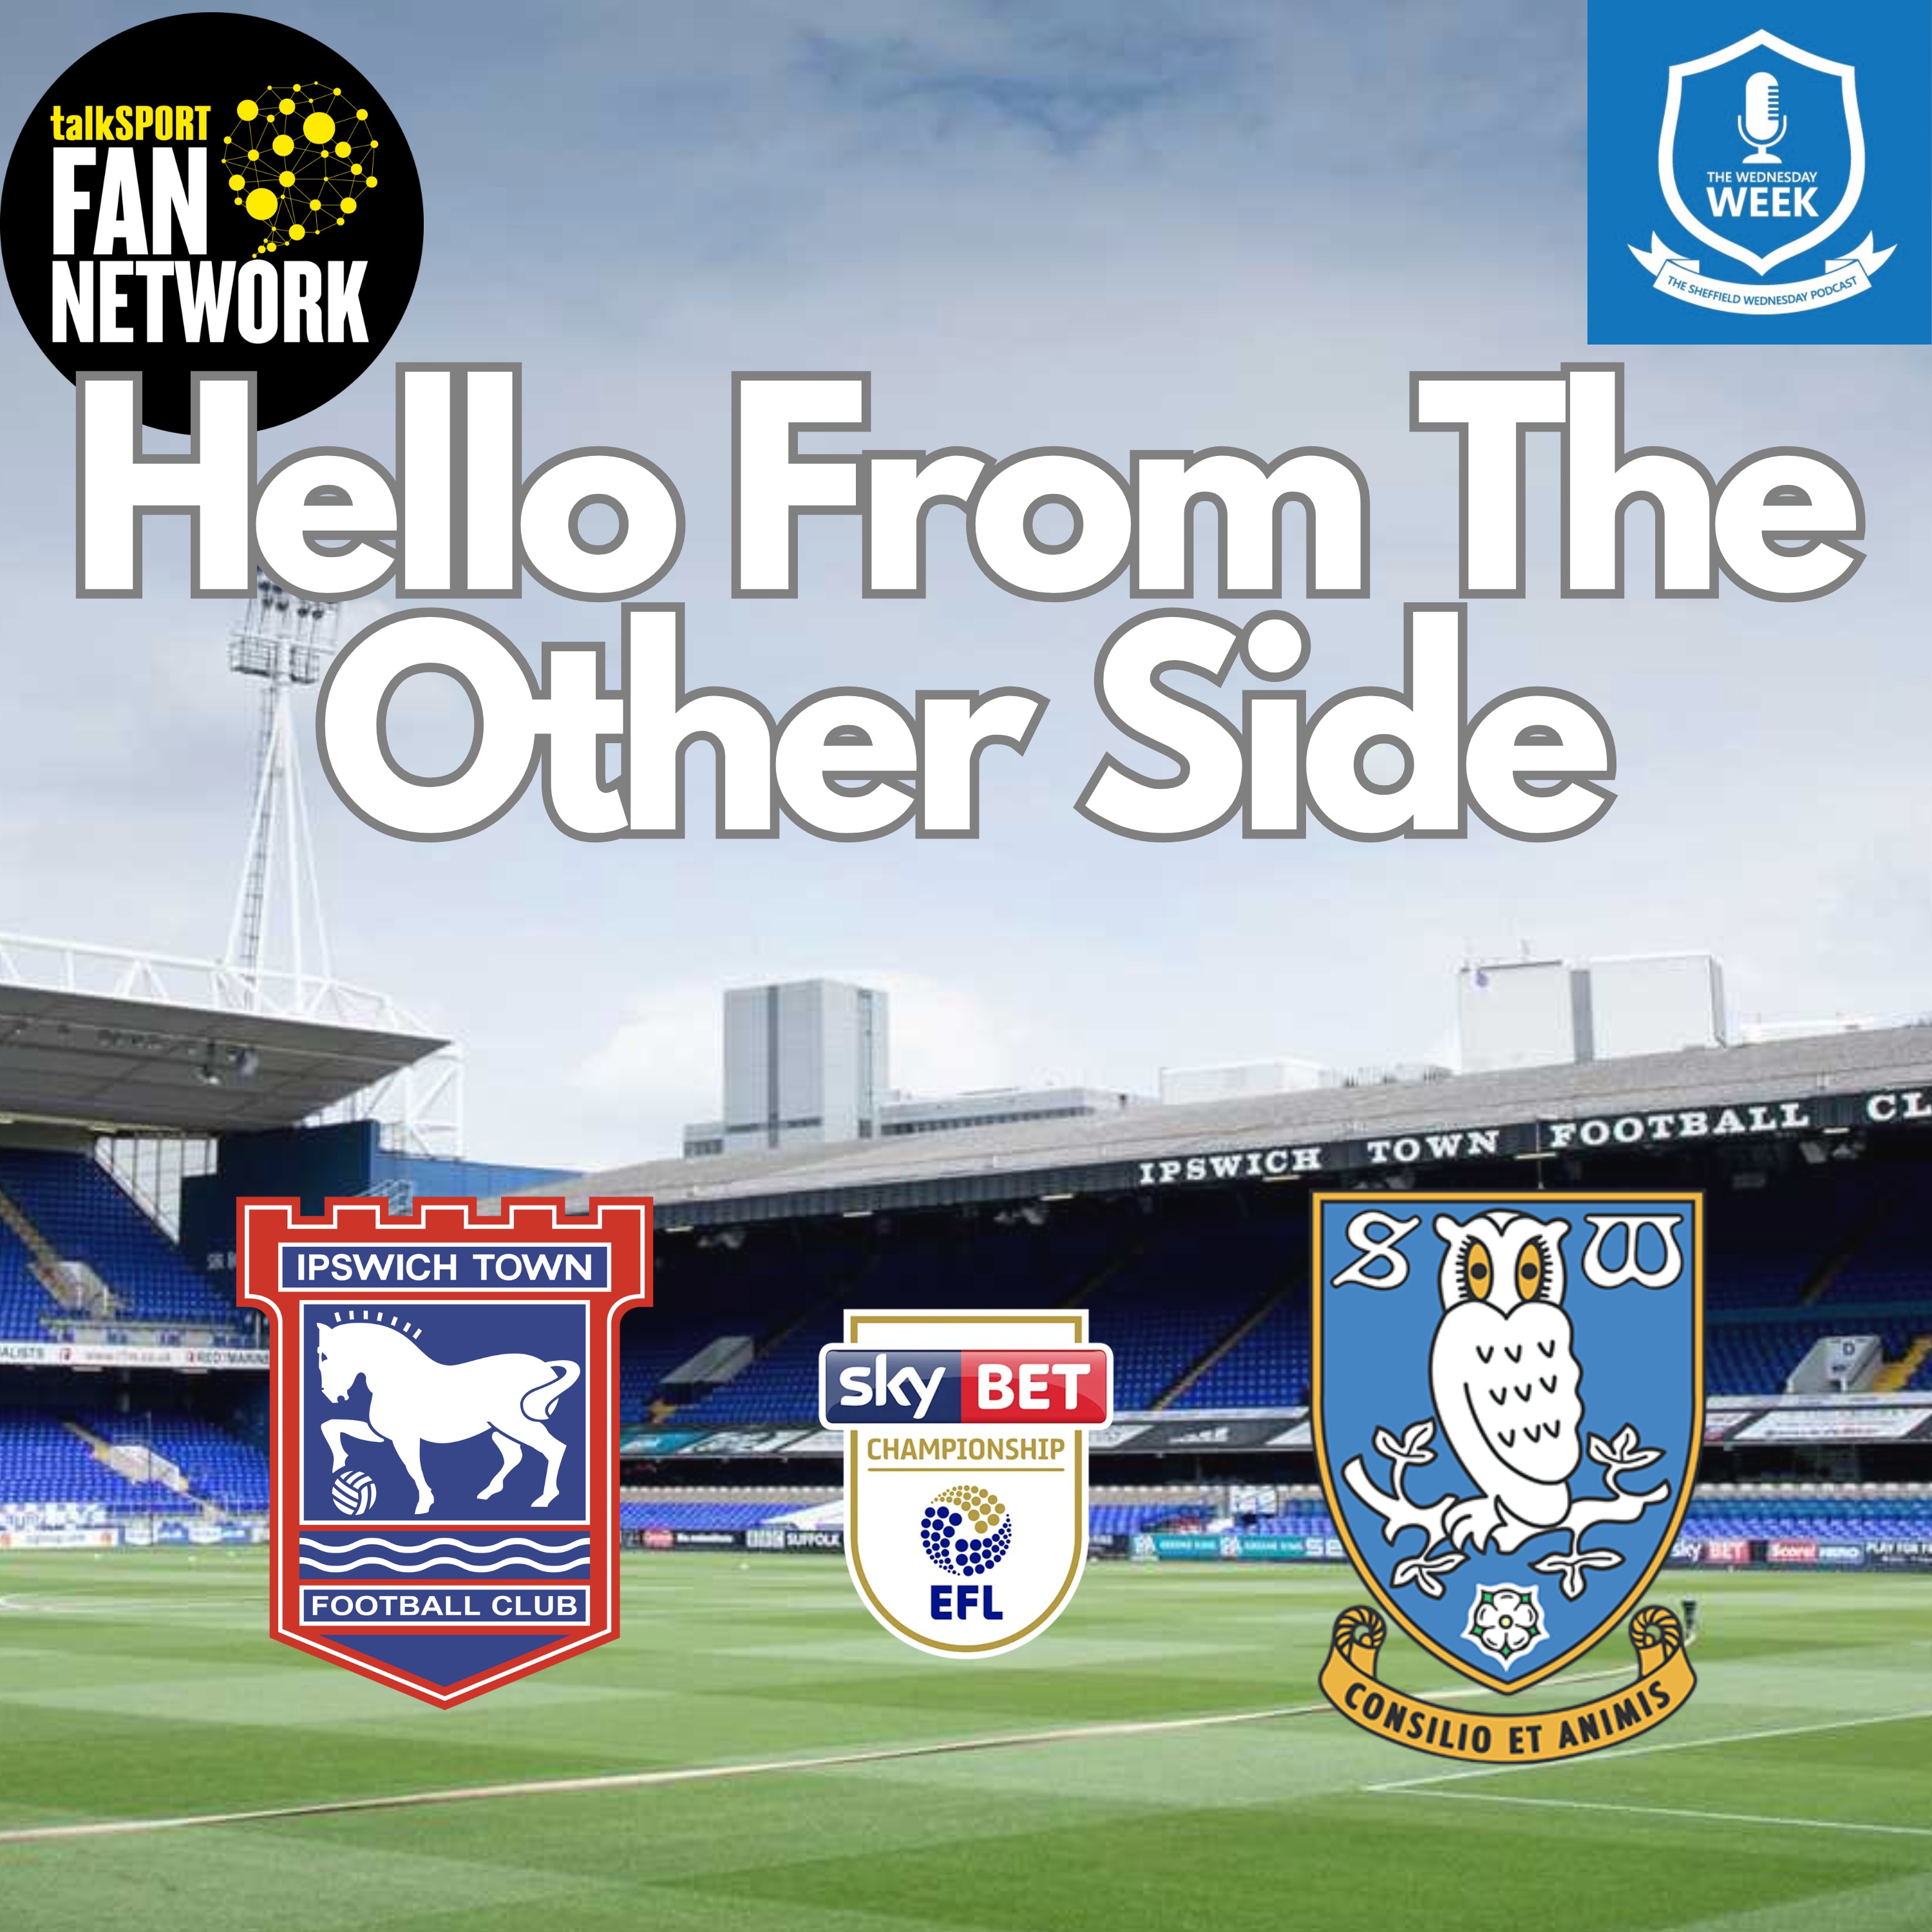 Hello From The Other Side - Ipswich Town